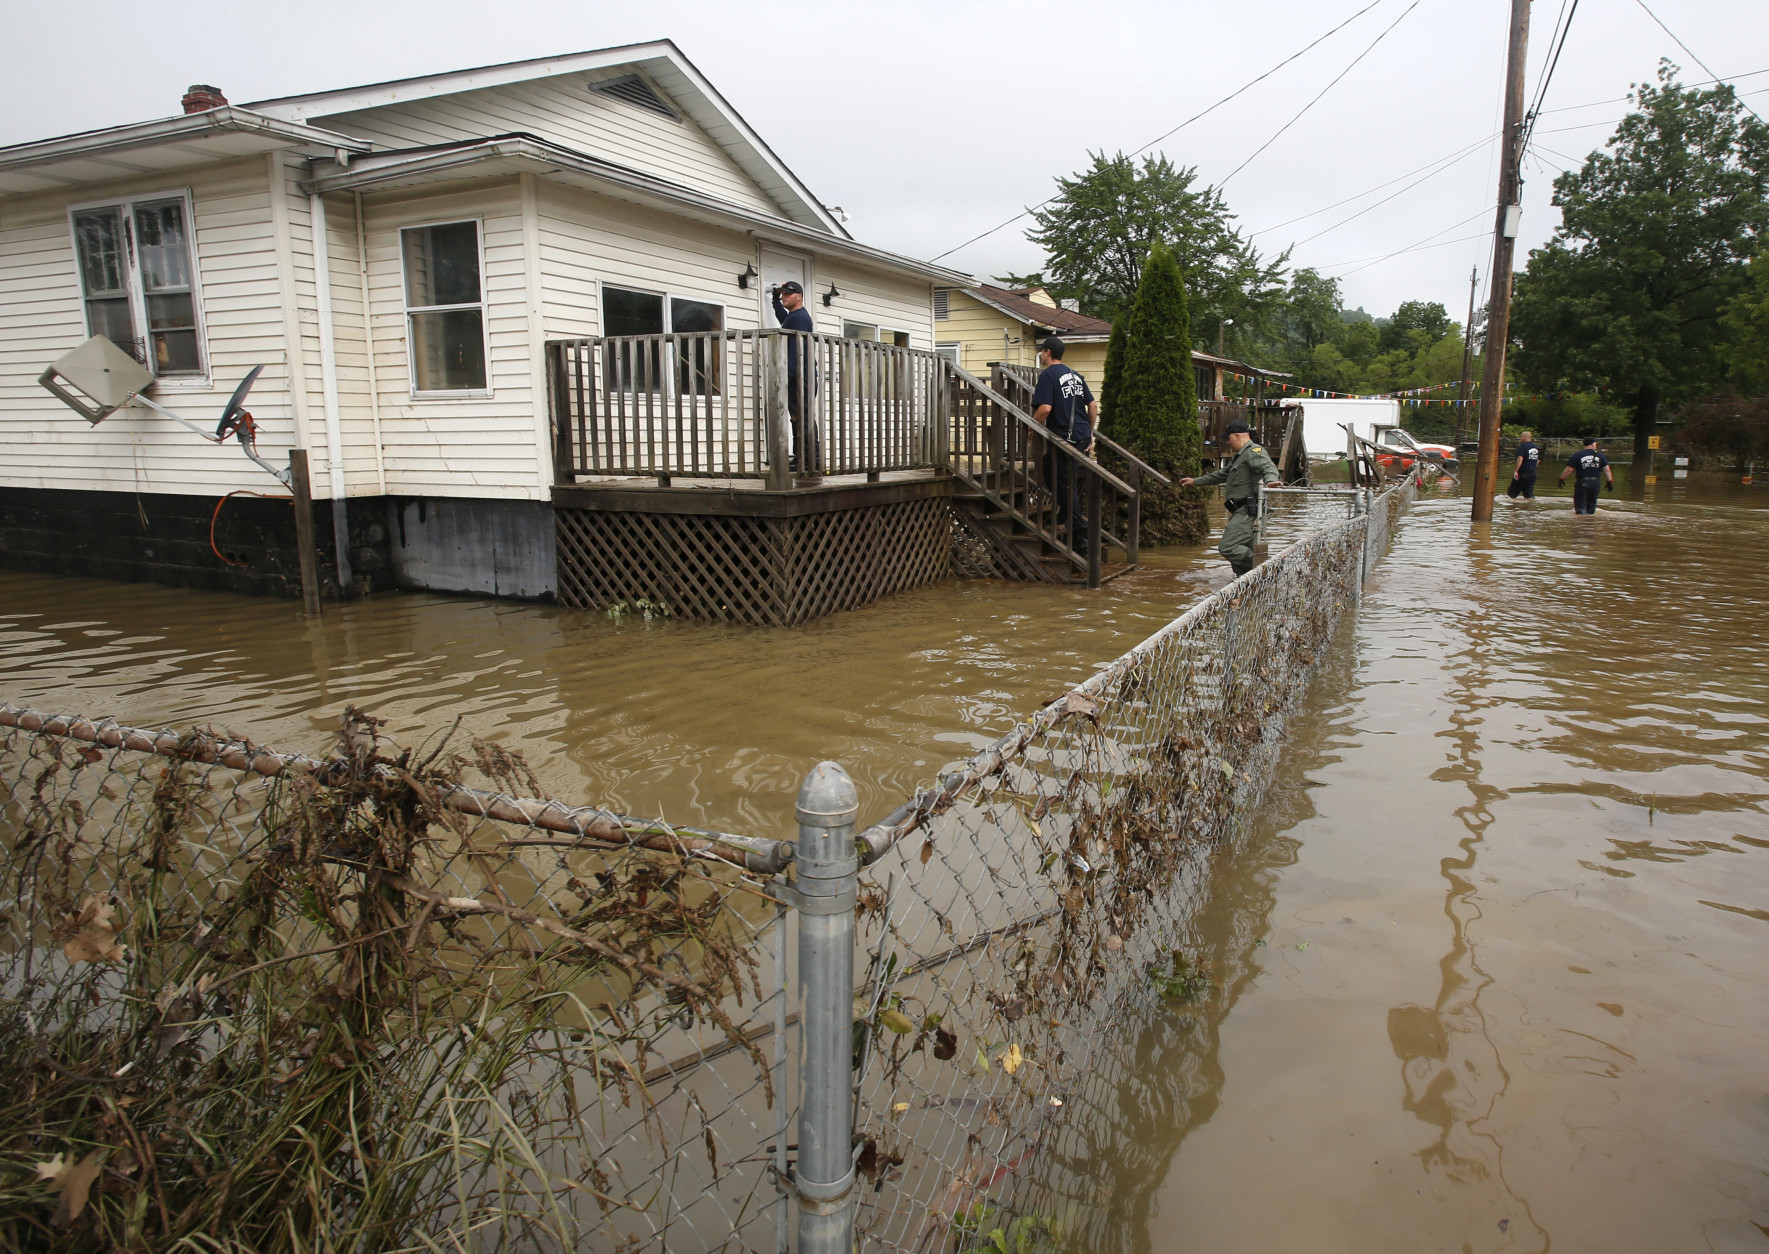 State Police and firefighters search homes along flooded streets in Rainelle, W. Va., Saturday, June 25, 2016. Heavy rains that pummeled West Virginia left multiple people dead, and authorities said Saturday that an unknown number of people in the hardest-hit county remained unaccounted for. (AP Photo/Steve Helber)